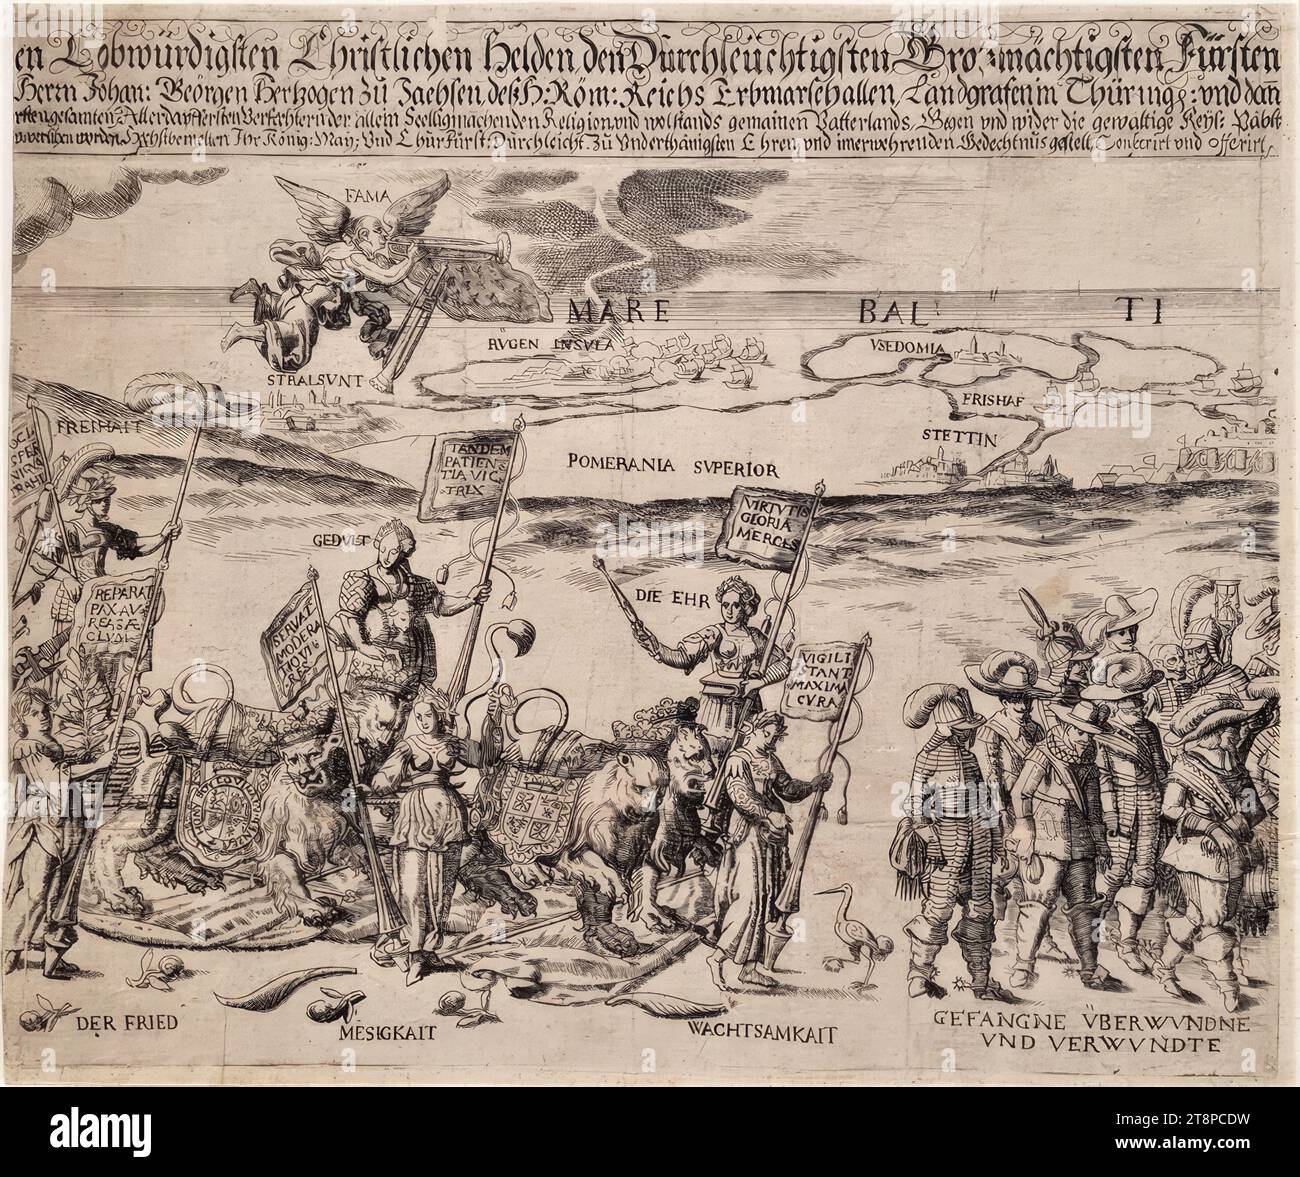 Allegorical triumphal procession of the Swedish King Gustav II Adolf on the occasion of his victory in the Battle of Breitenfeld on September 17, 1631 - Sheet 3, 'Triumph over the magnificent and almost unimaginable Victori, who was commanded by the lord of the hosts, the most praiseworthy Christian heroes, the most translucent, Most Powerful Princes | and gentlemen, Hern Gustvo Adolpho, the Swedes, Goths and Wends king, grand dukes in Fin(n)land So well also Mr. Johan: Geörgen Hertcult of Saxony, Deß H: Rom: Imperial hereditary marshals Stock Photo